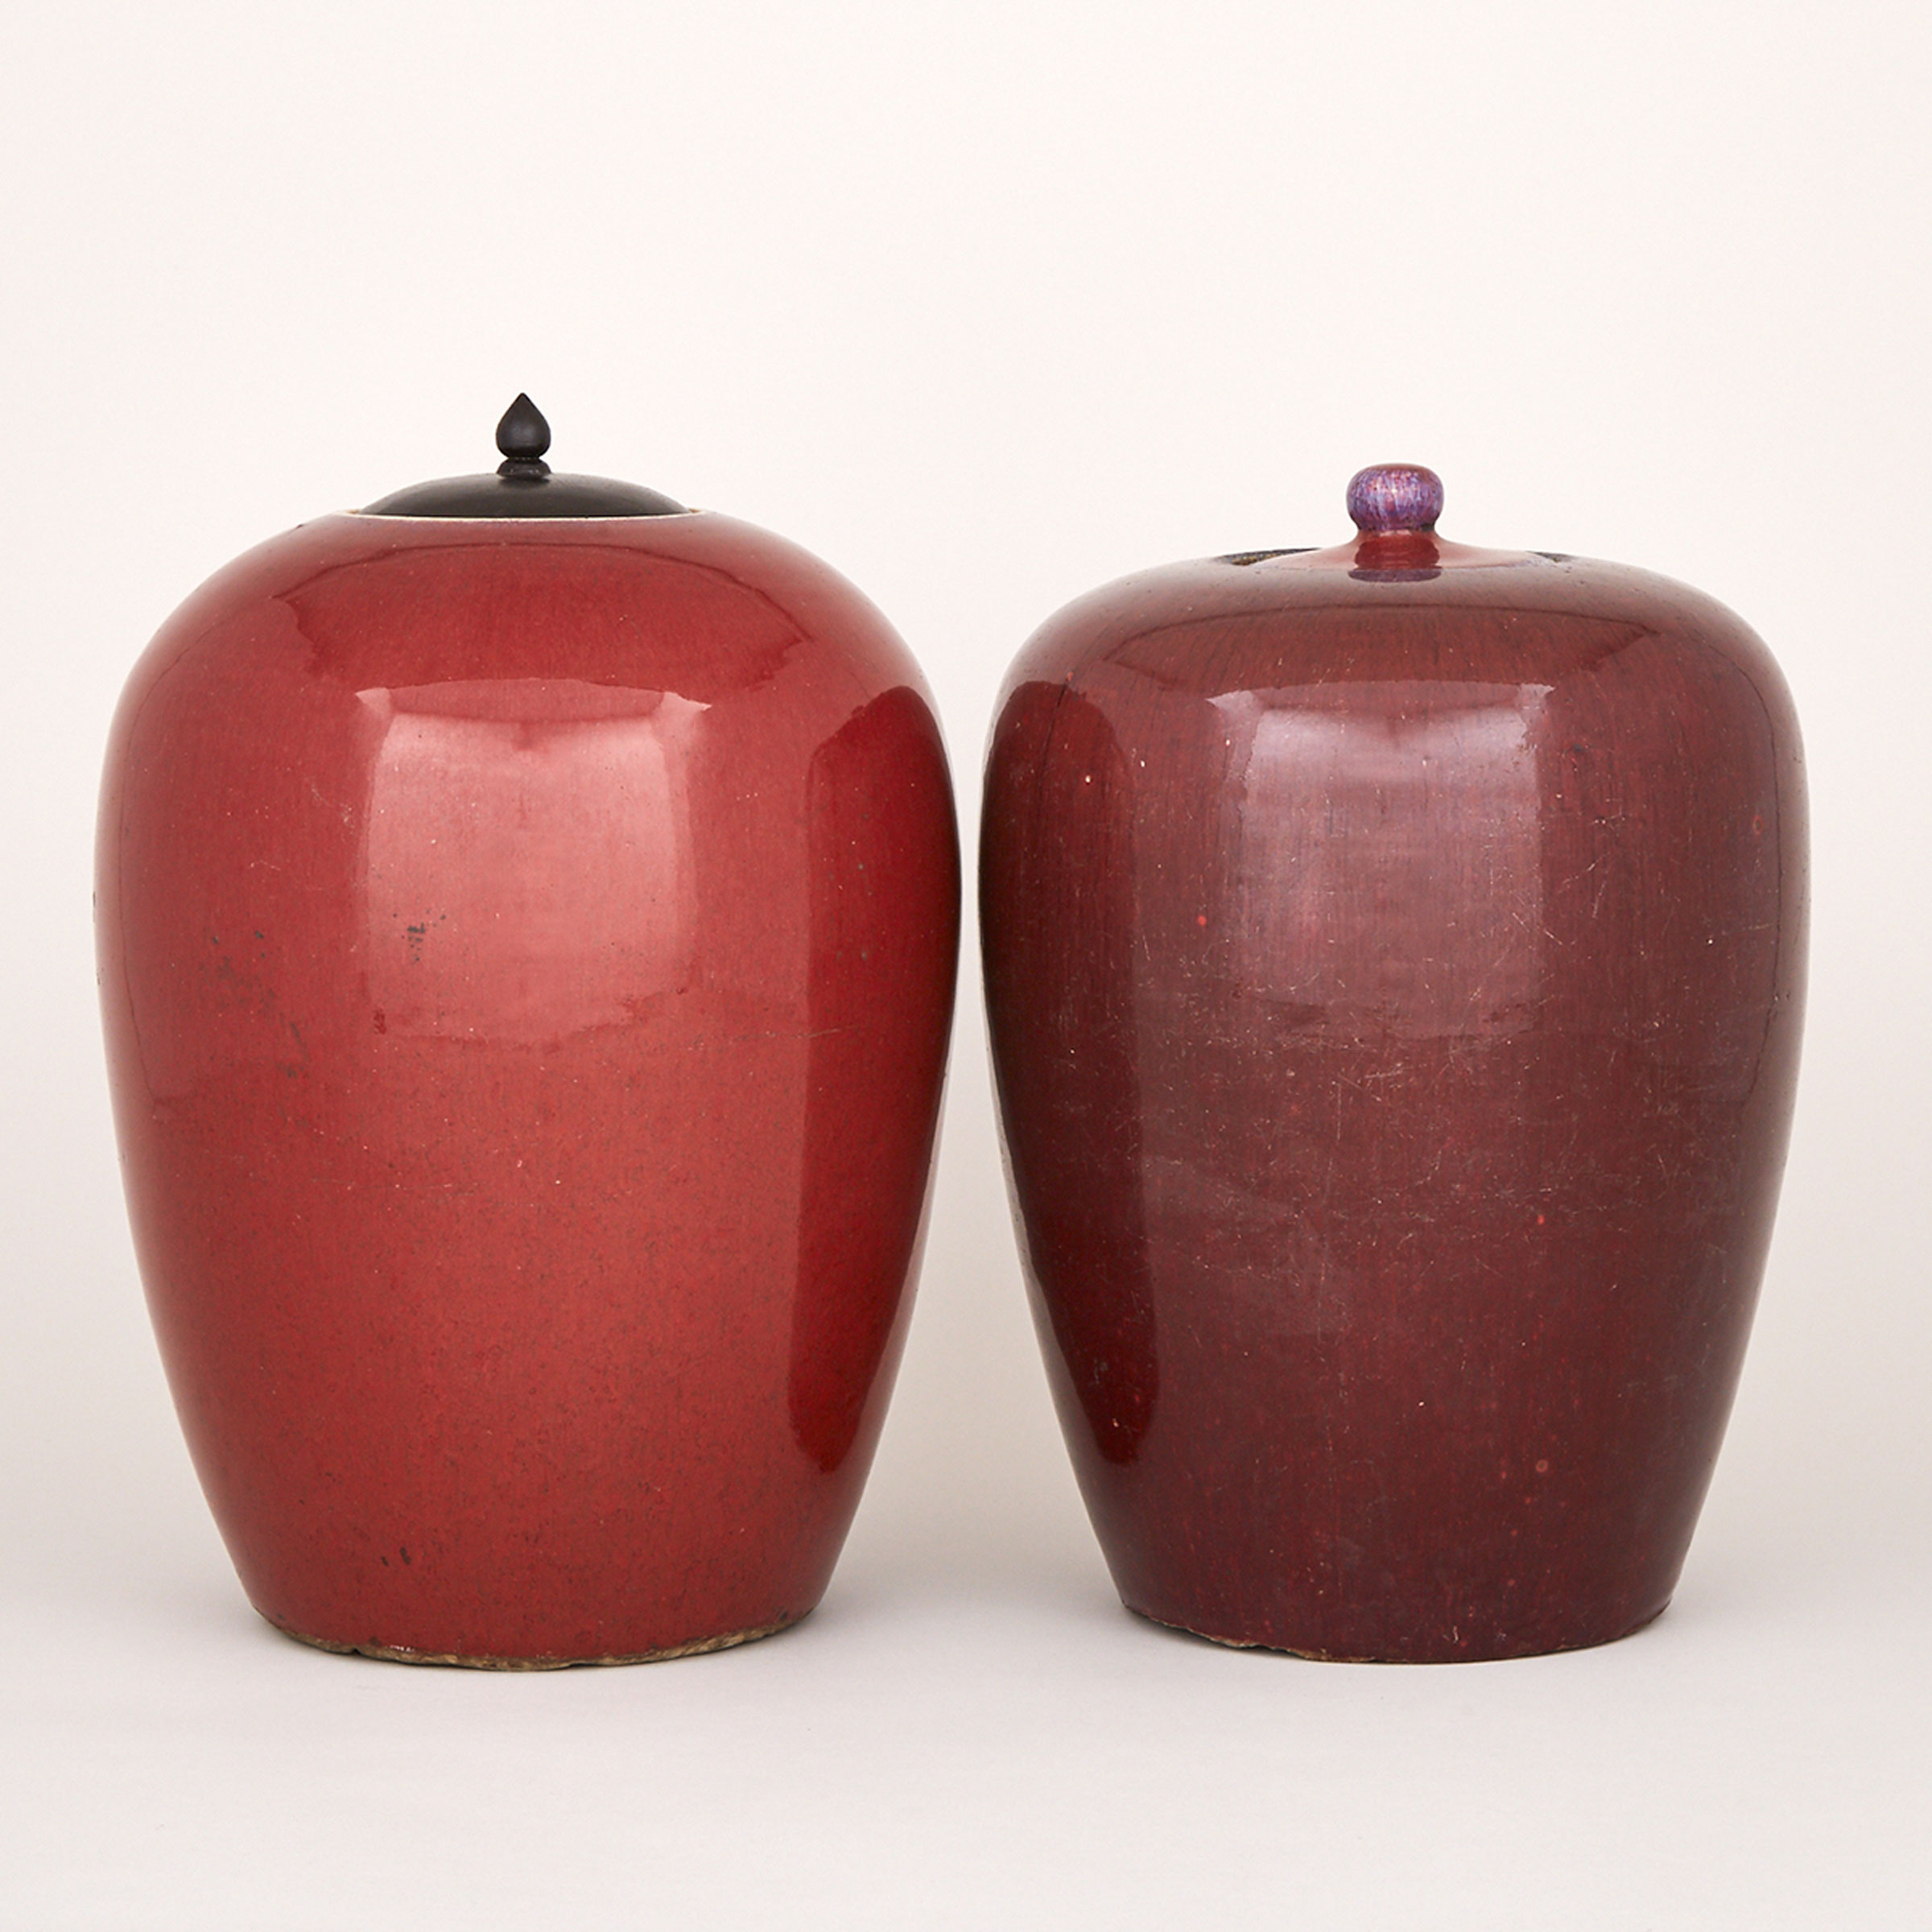 Two Red Glazed Jars, 18th/19th Century